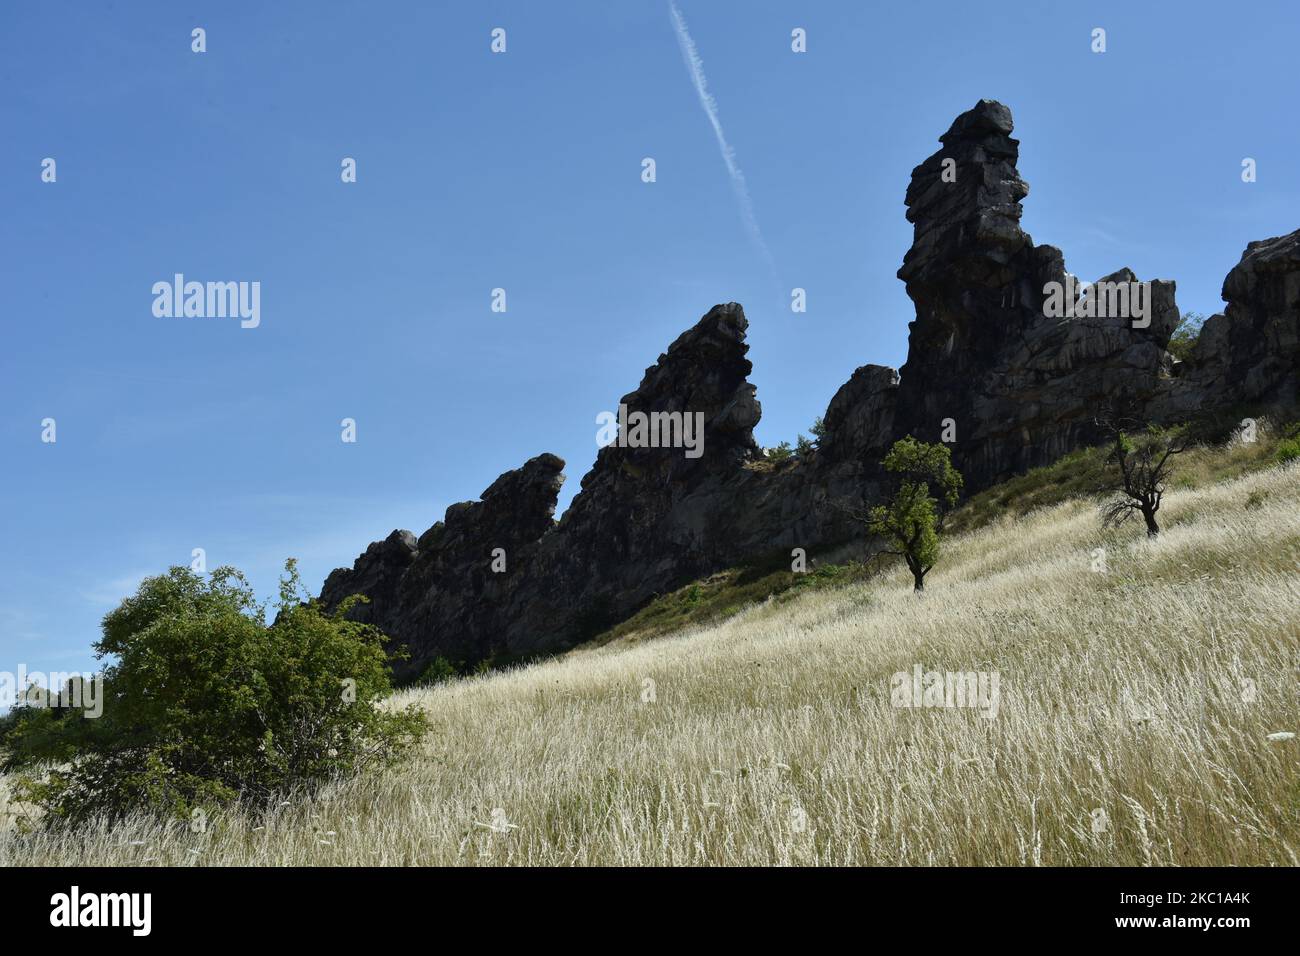 The Teufelsmauer (Devil's Wall) rock formation in the Harz Foreland in central Germany Stock Photo